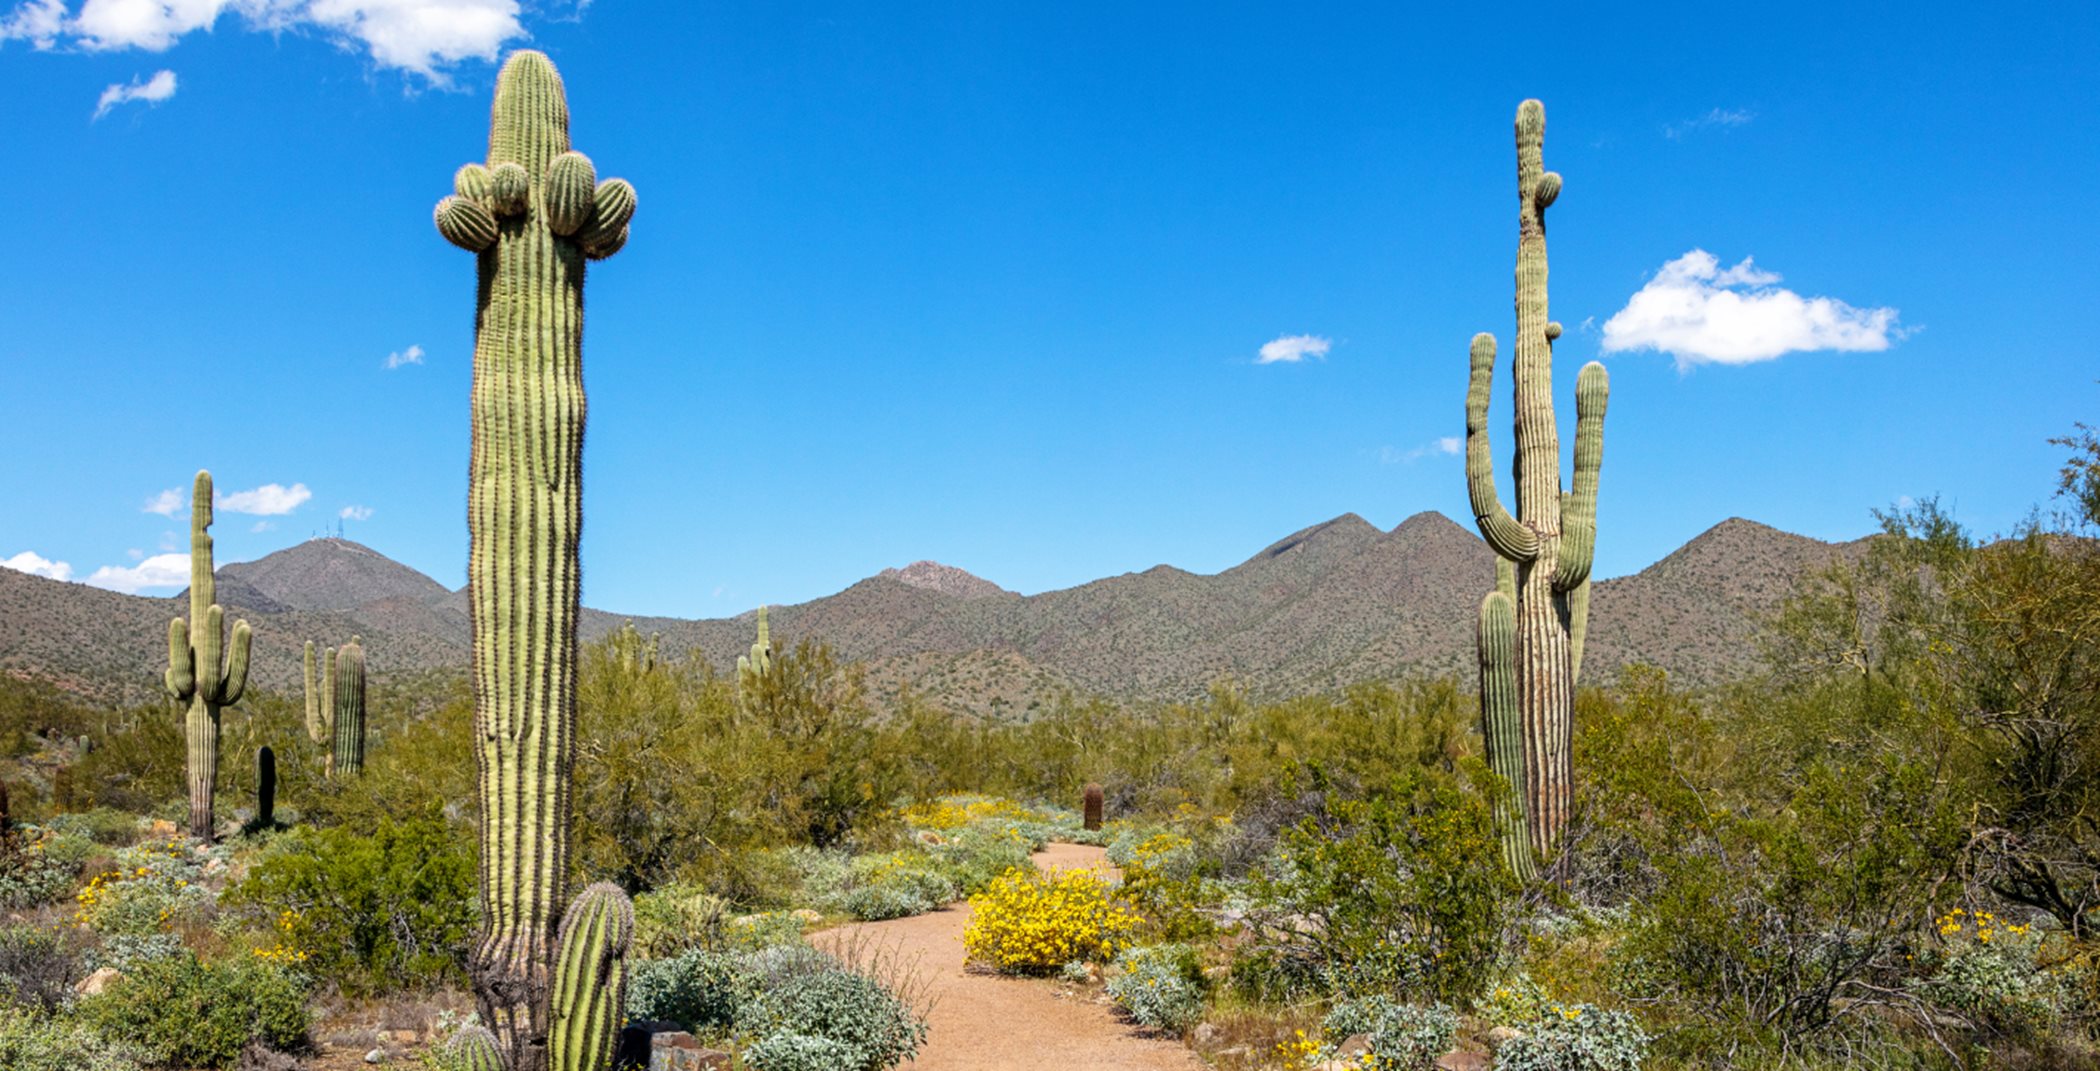 Desert trail with cacti and brush